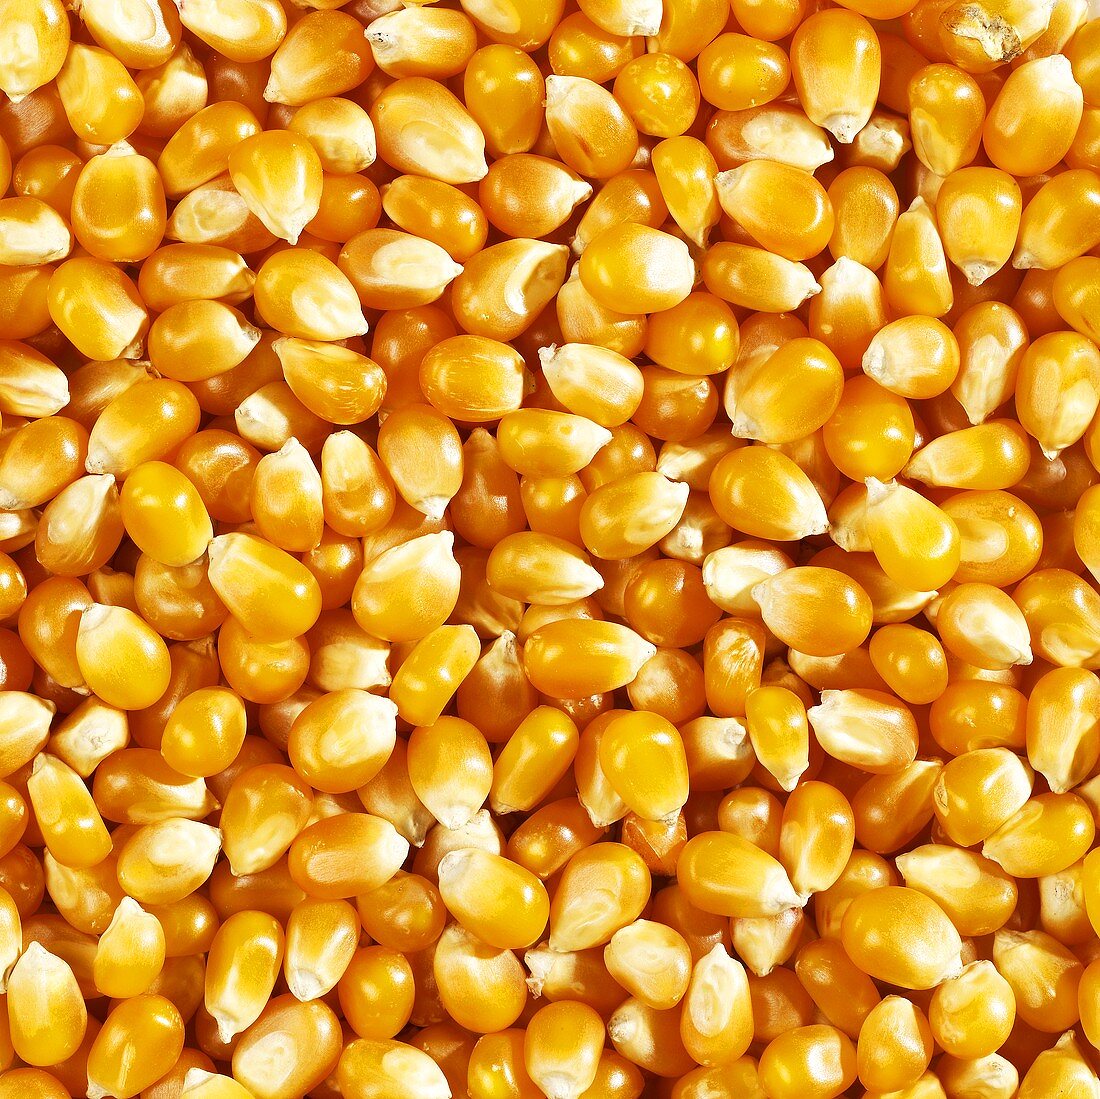 Grains of corn, filling the picture